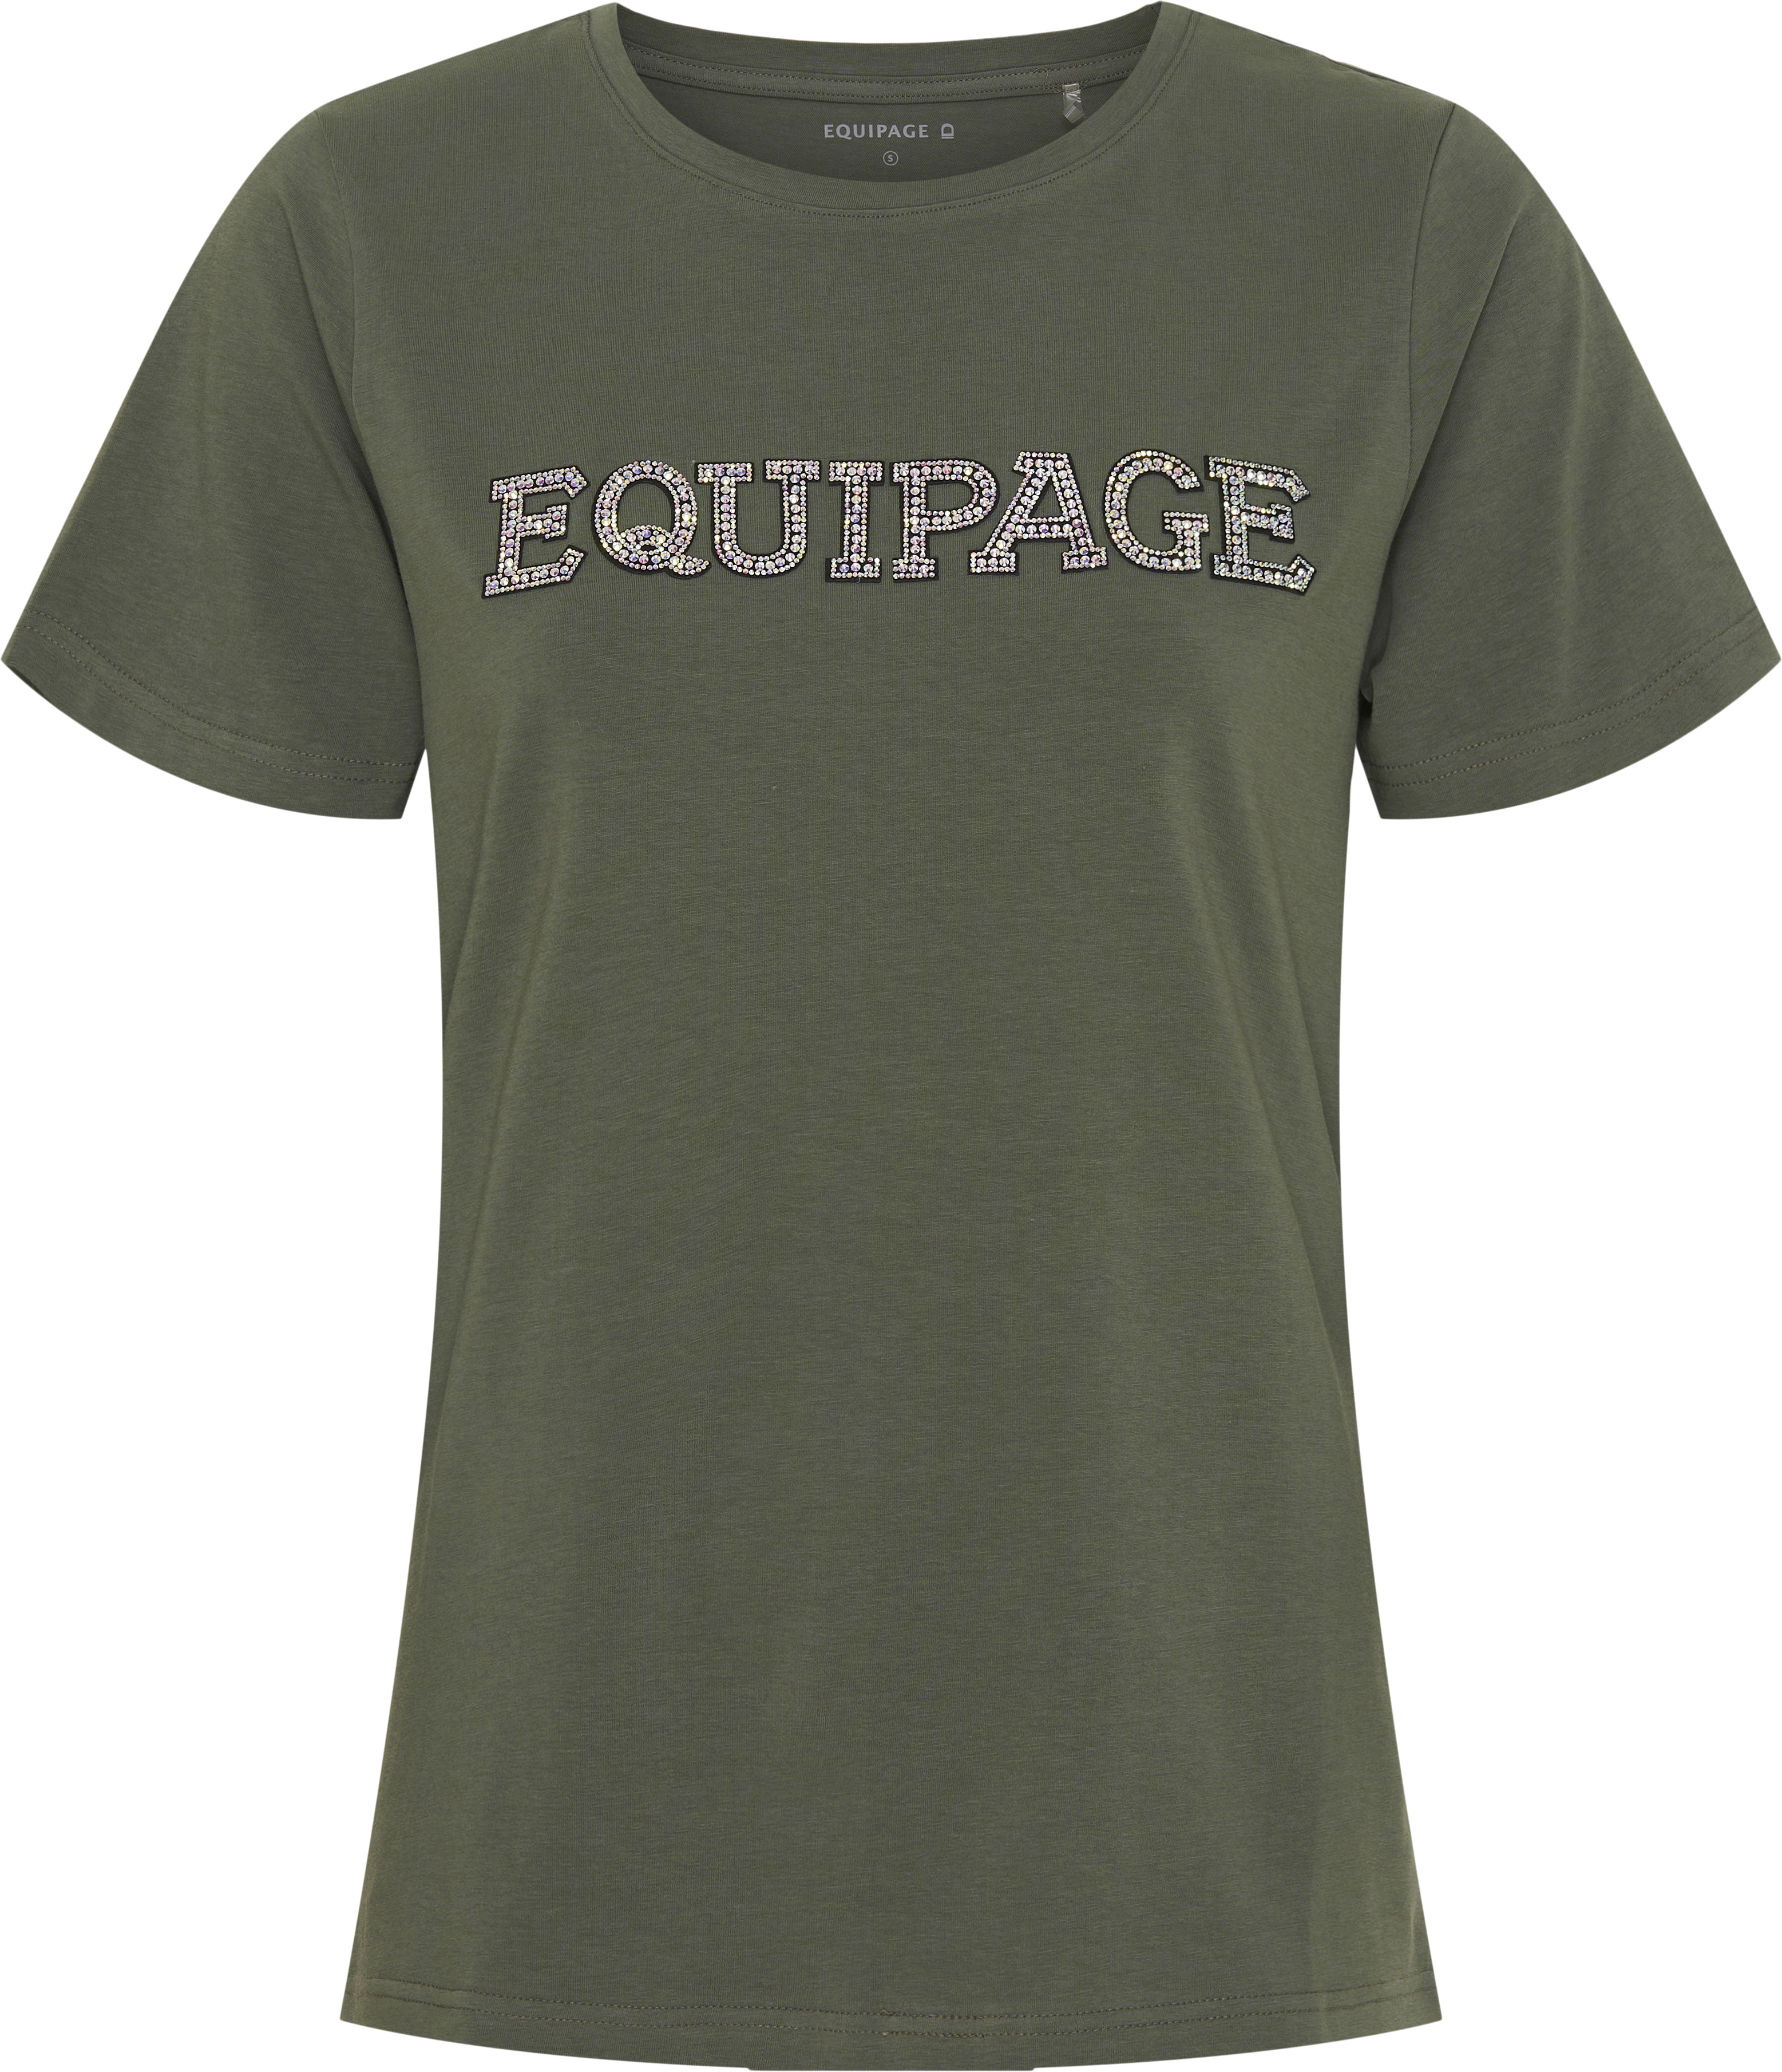 Equipage Melina T-Shirt - Forest (XS)